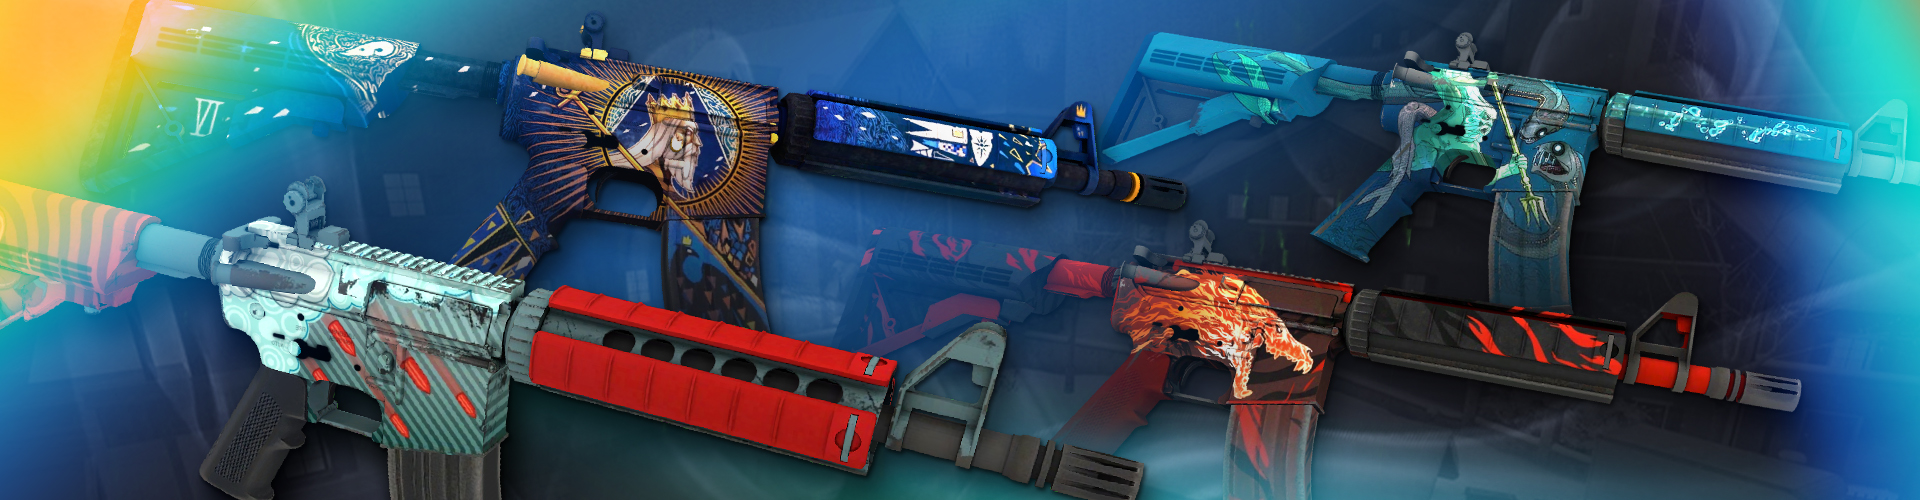 The Best FAMAS Skins in CS2 You Should Buy